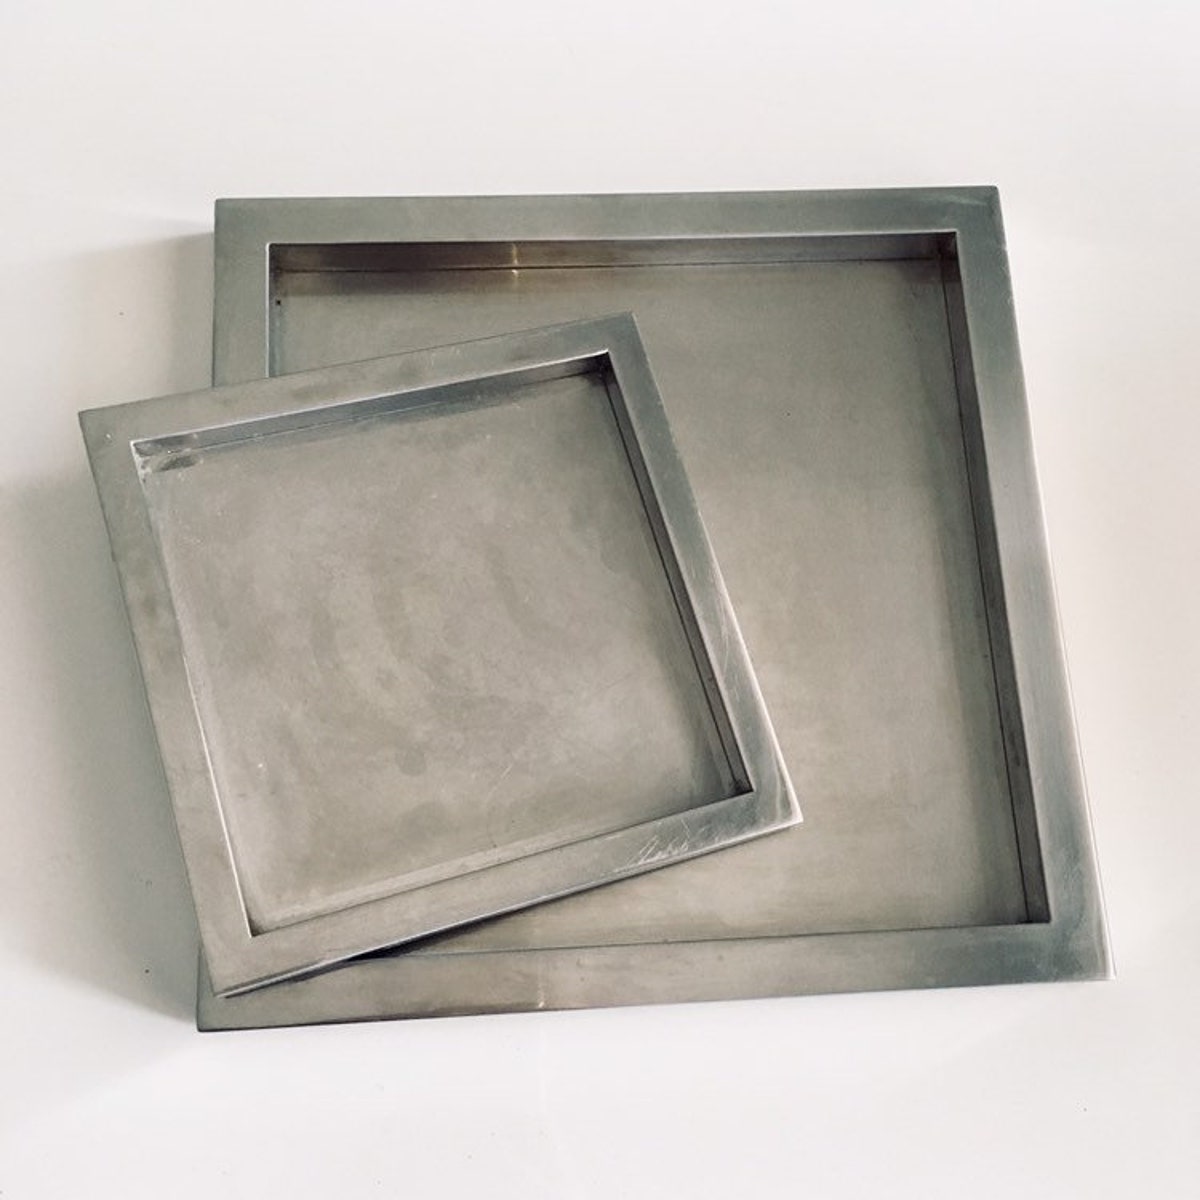 1960's Set of Two Square Trays in Silver Modernism Design Uncluttered, They Are Still Very Current - Etsy